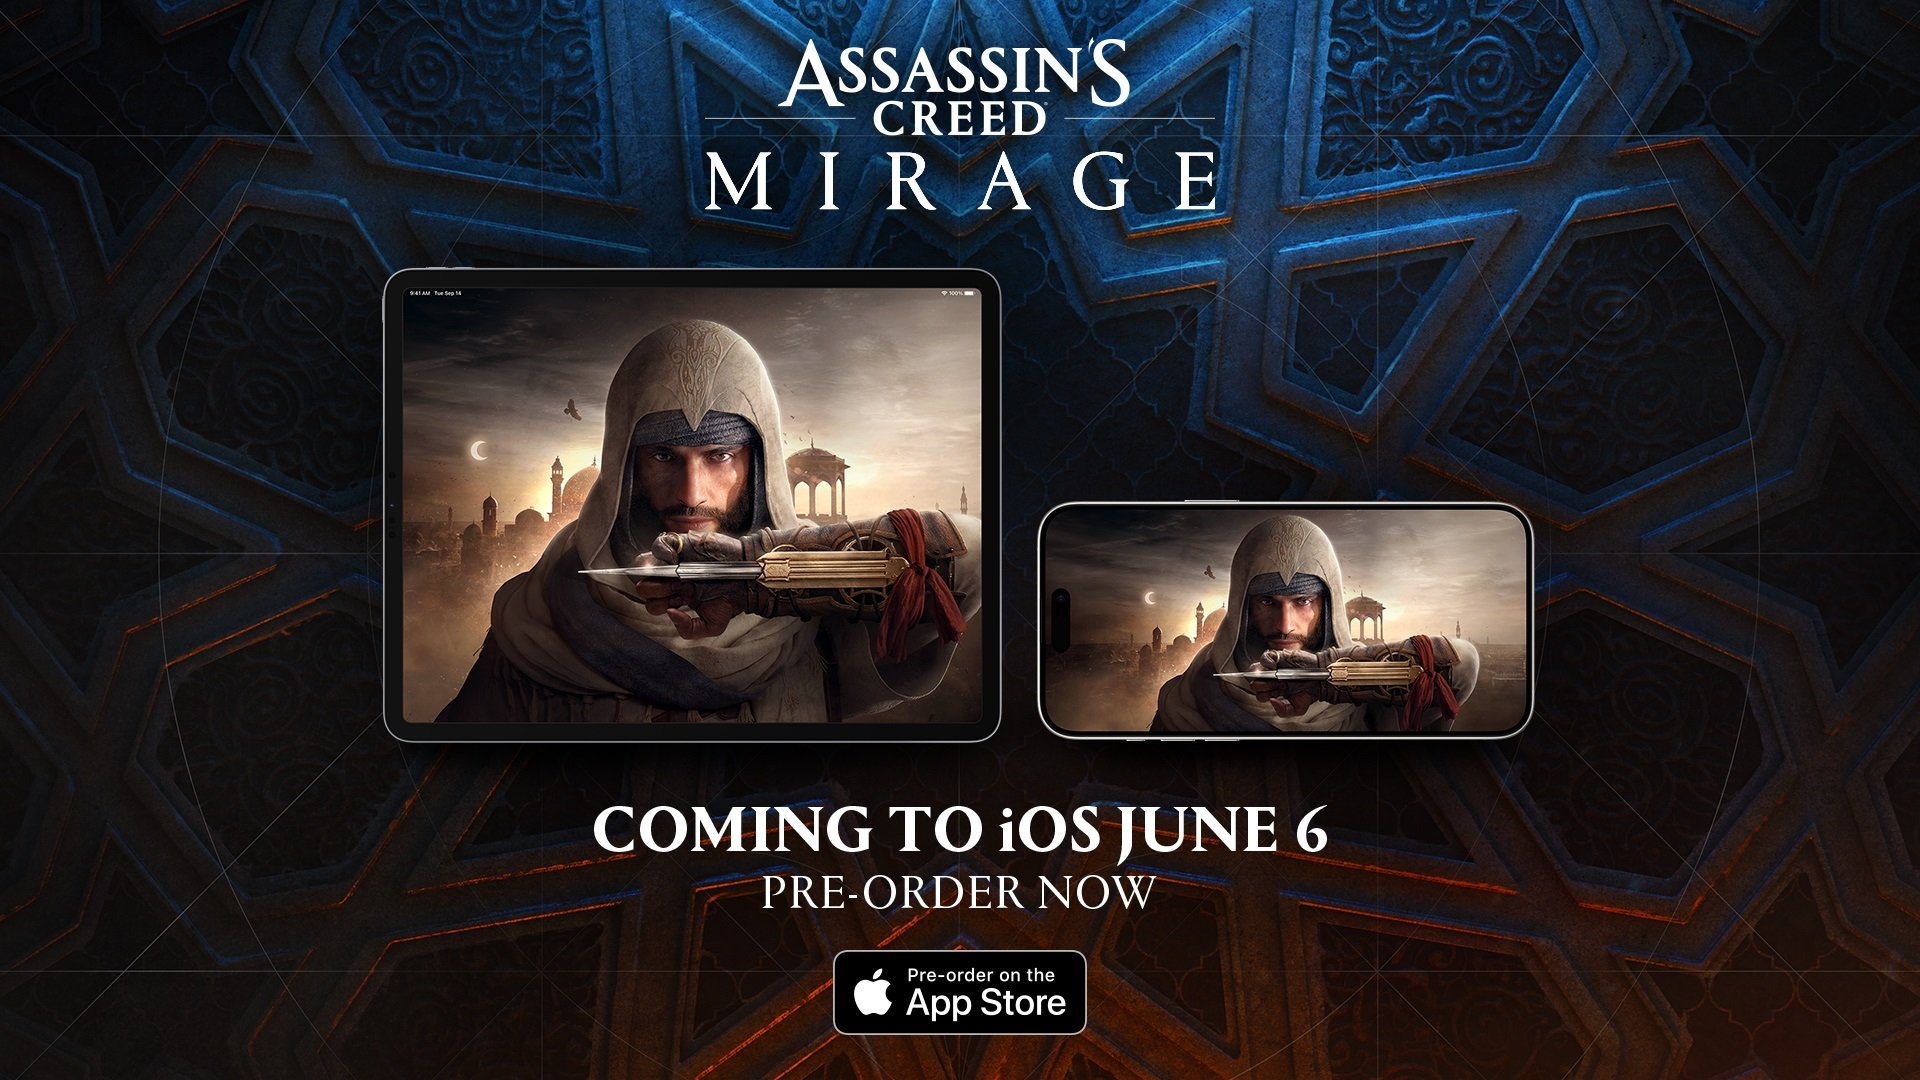 Assassin’s Creed Mirage receives later than expected release date for iOS devices